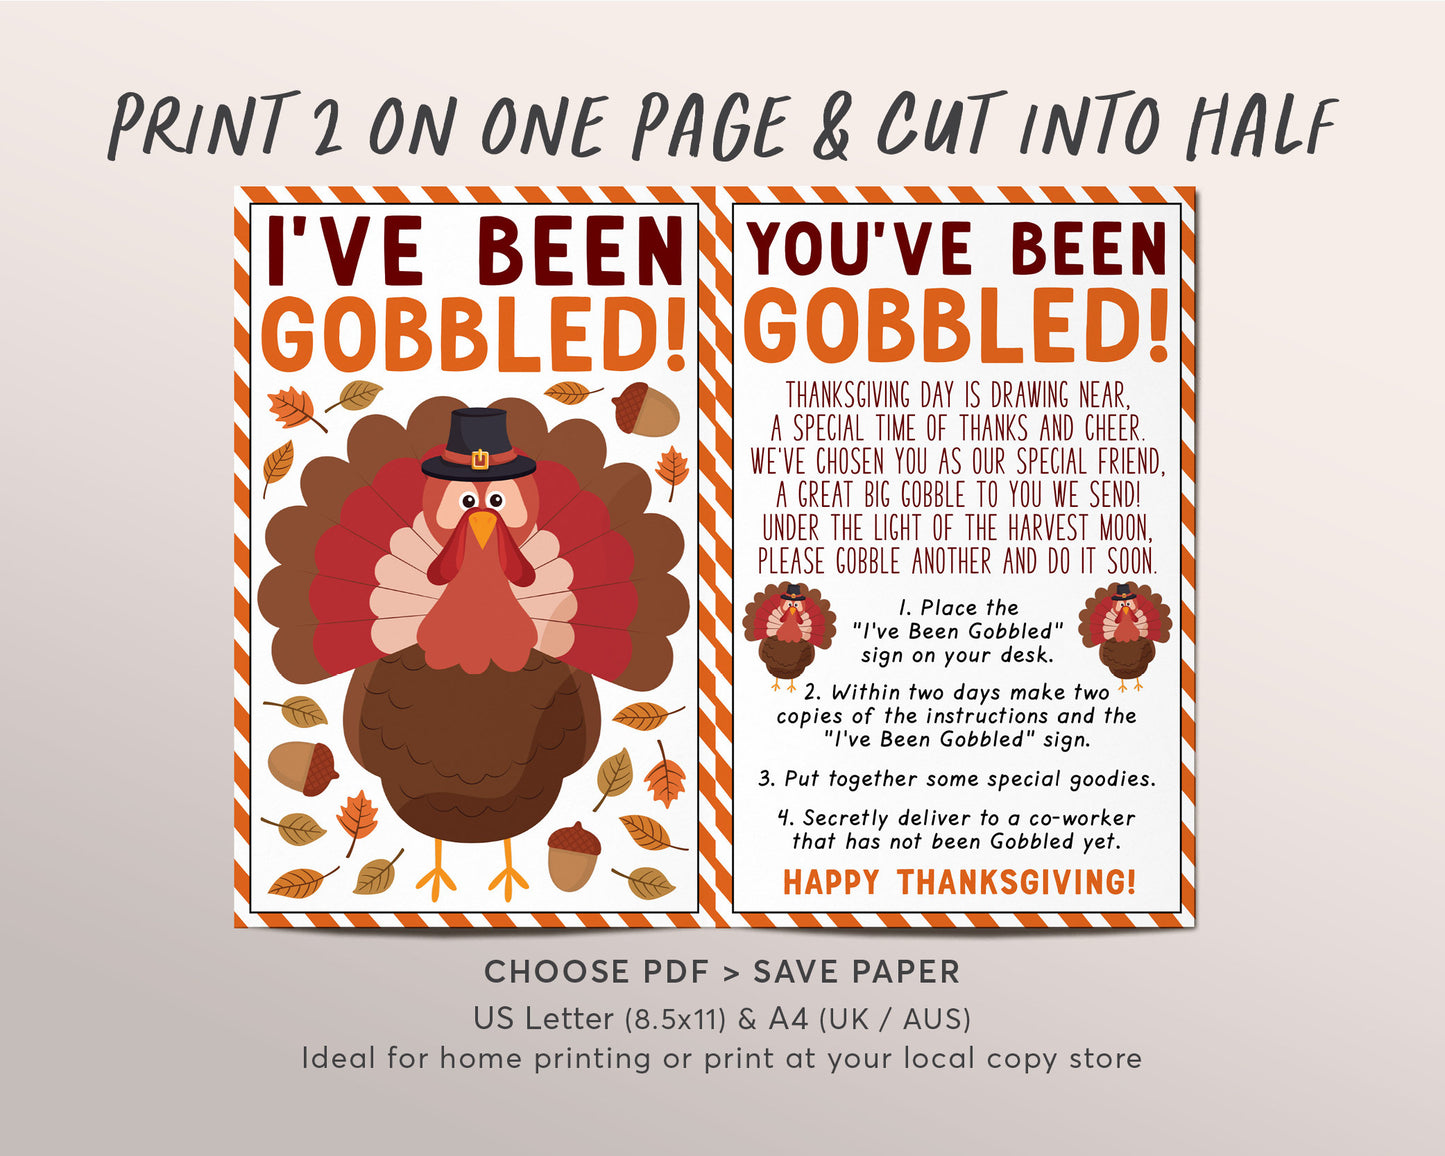 I've Been Gobbled Coworker Game Editable Template, You've Been Gobbled Work, Thanksgiving Office Tradition Sign Instructions Gift Turkey